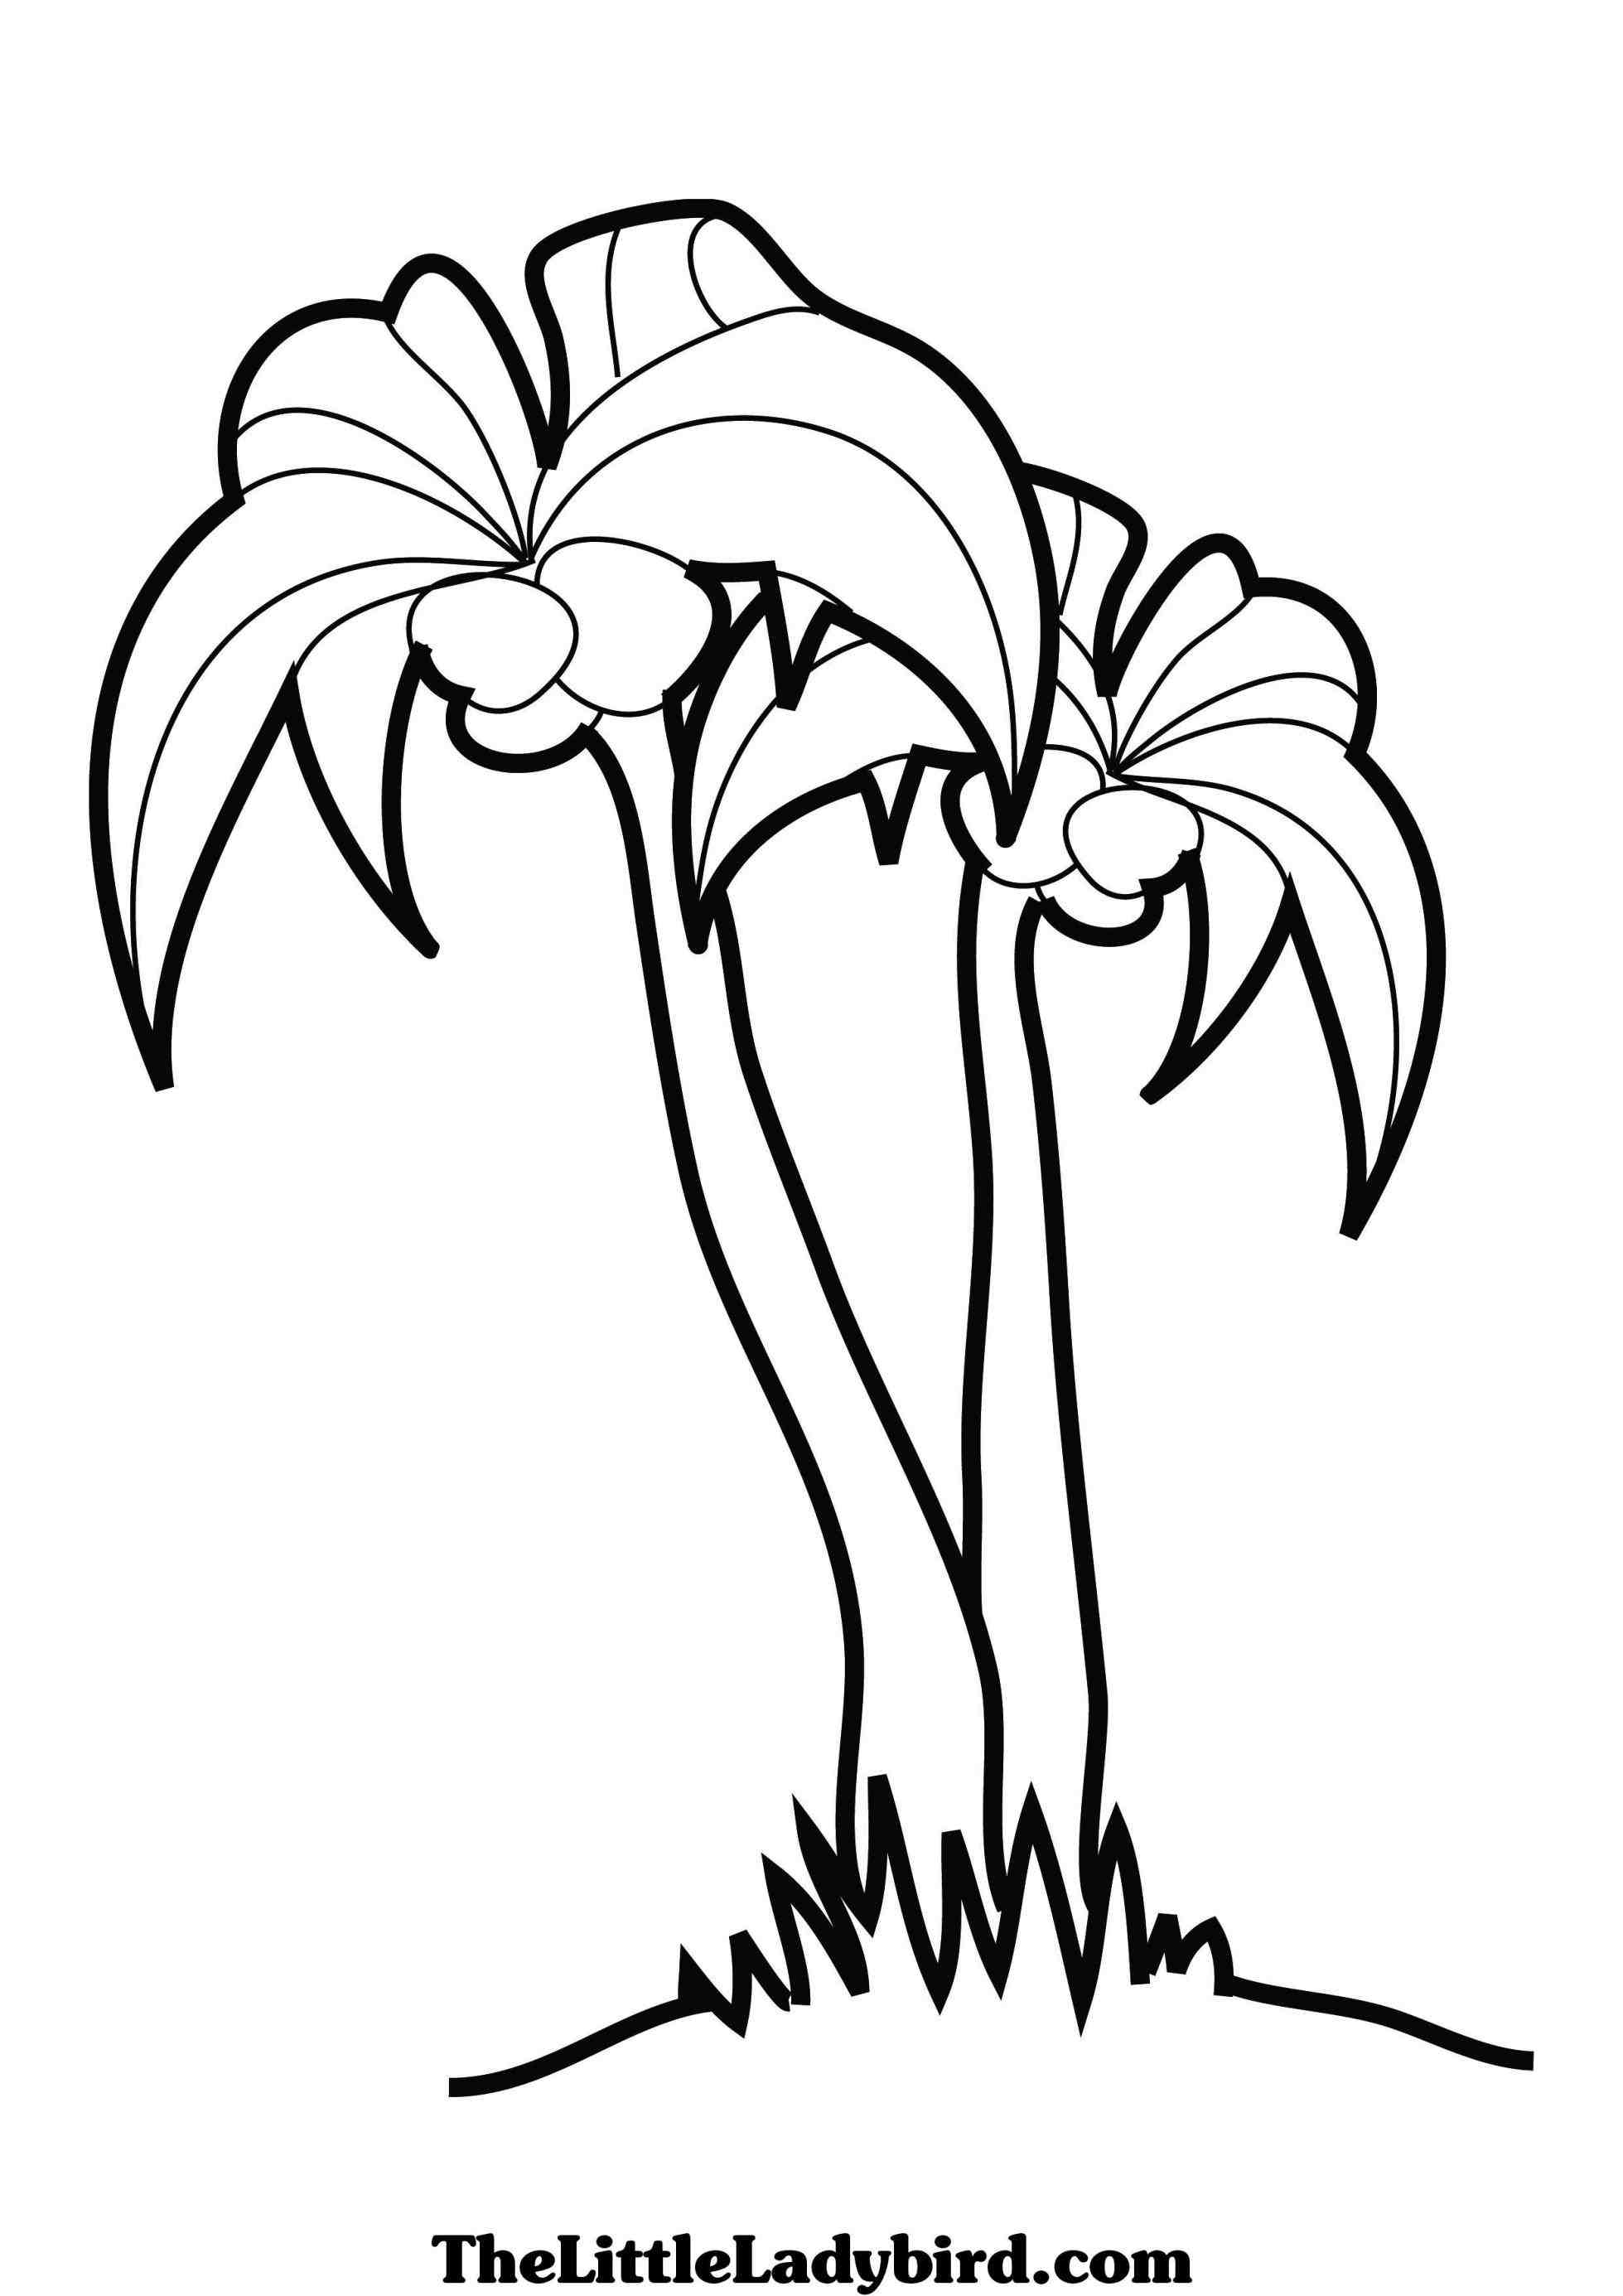 Palm Tree Coloring Page #3352